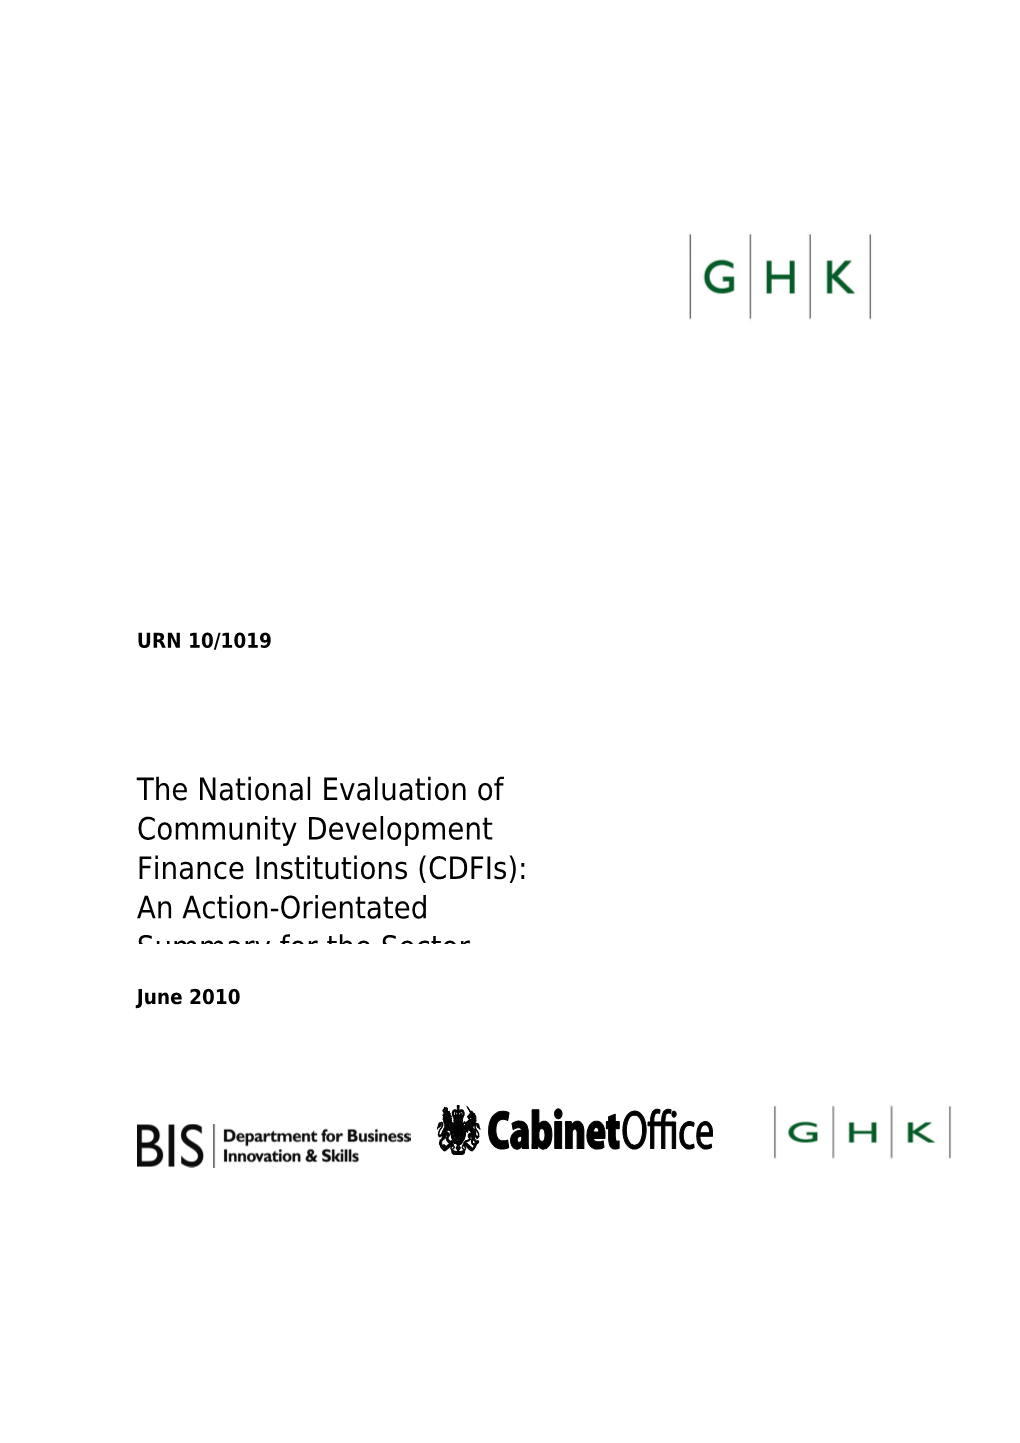 The National Evaluation of Community Development Finance Institutions Cdfis : an Action